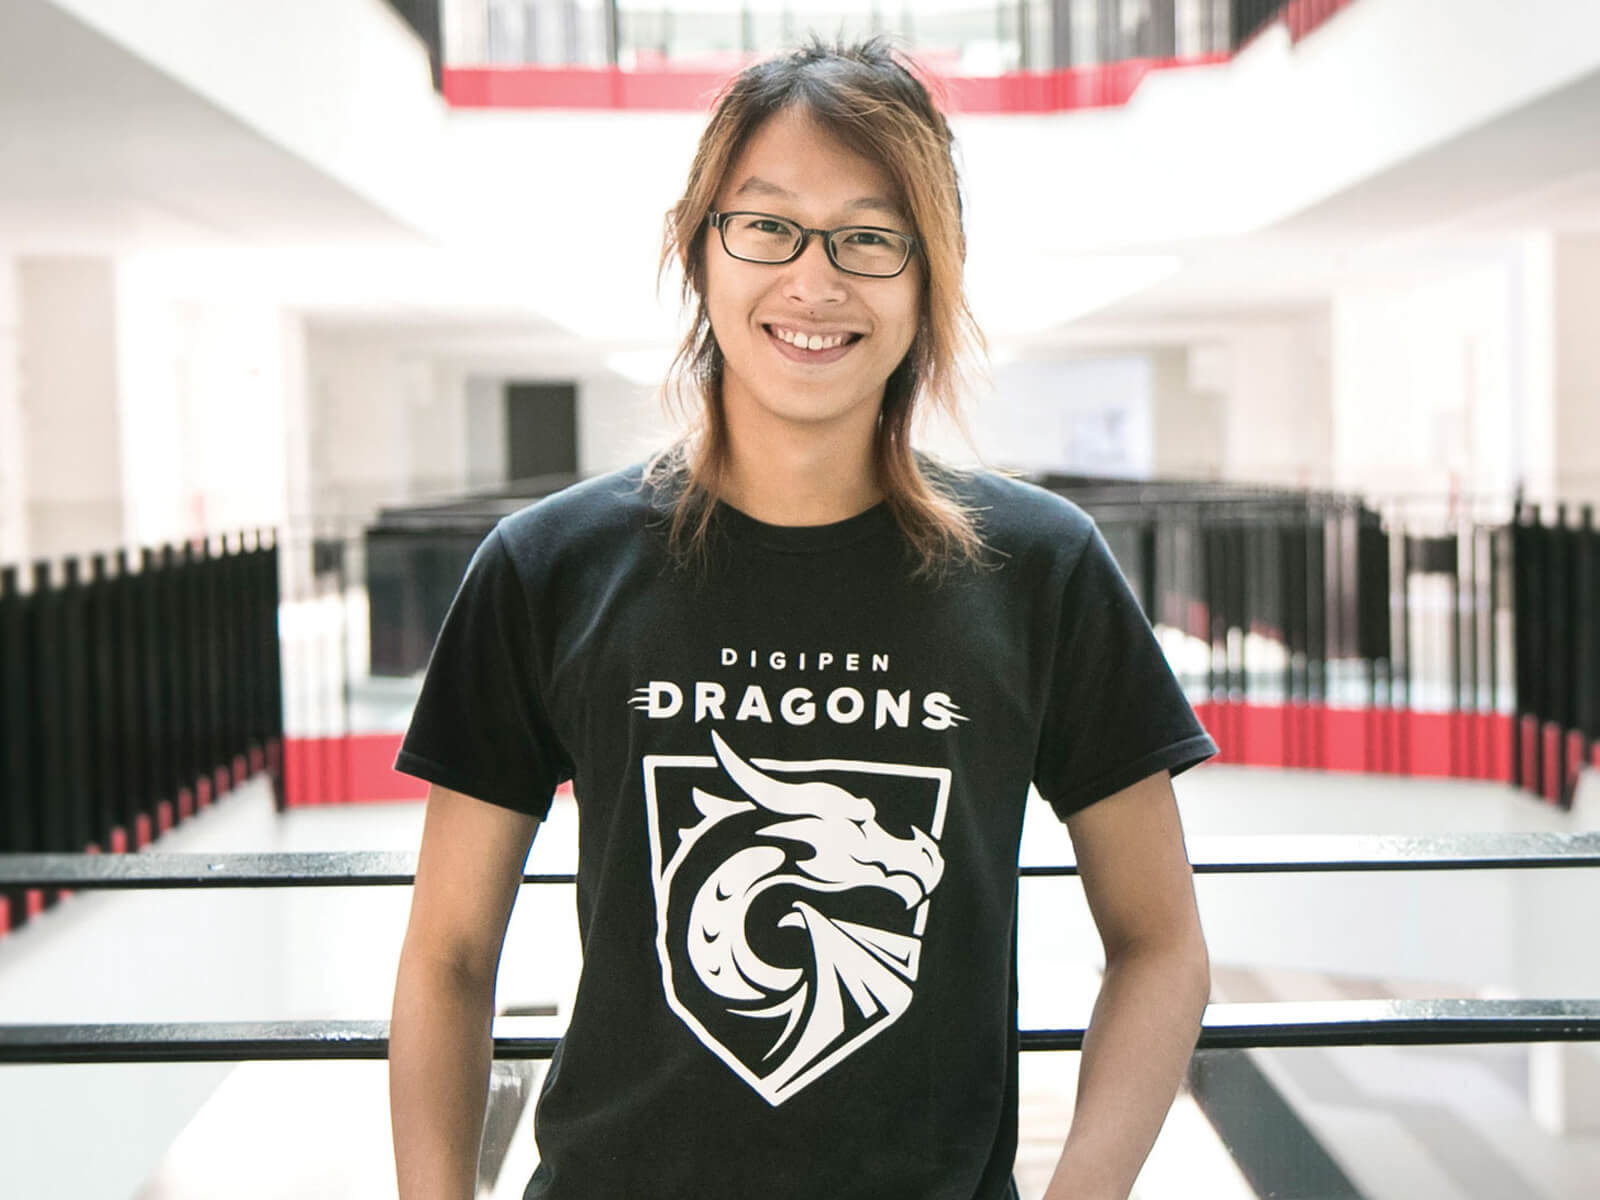 DigiPen graduate Jovi Kartolo poses for a photo at a railing on the second floor wearing a black DigiPen Dragons t-shirt